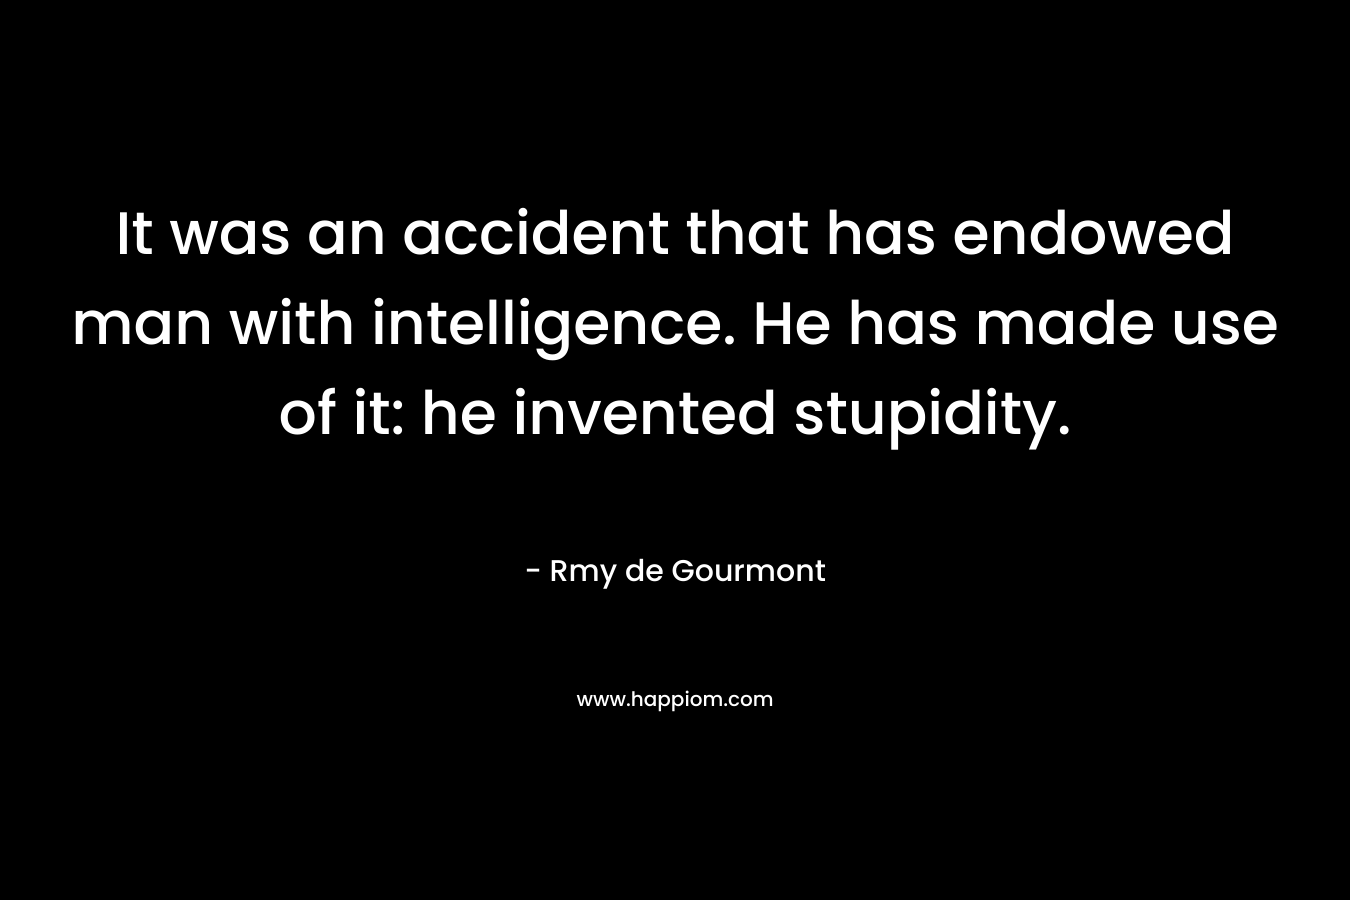 It was an accident that has endowed man with intelligence. He has made use of it: he invented stupidity. – Rmy de Gourmont